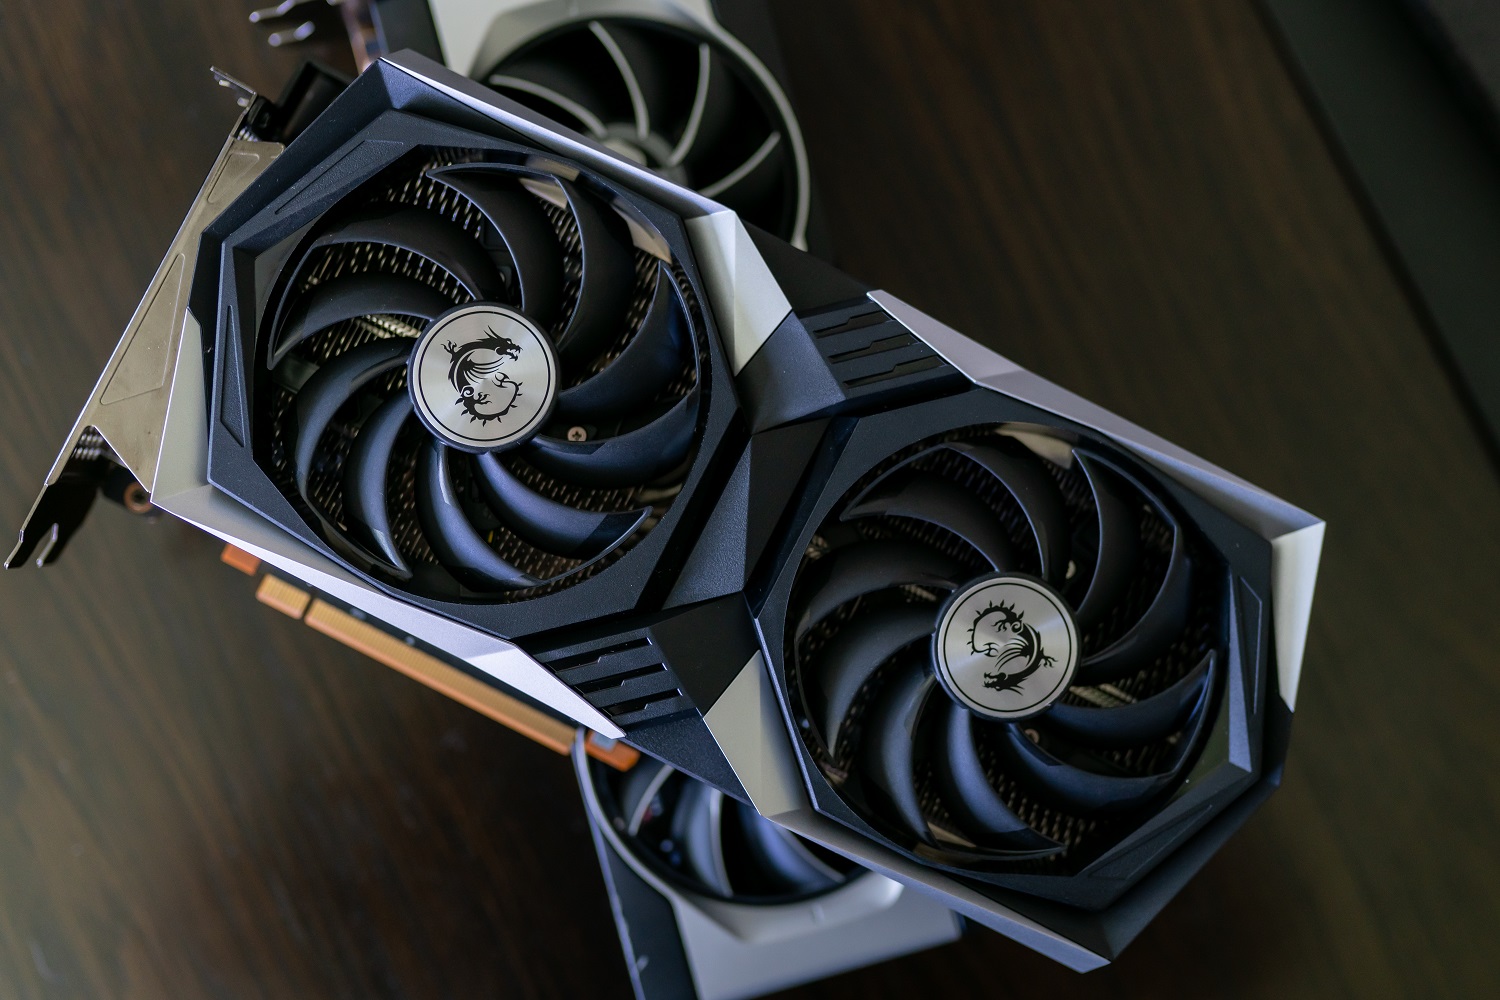 AMD Radeon RX 6600 XT review: solid 1080p performance, but falls